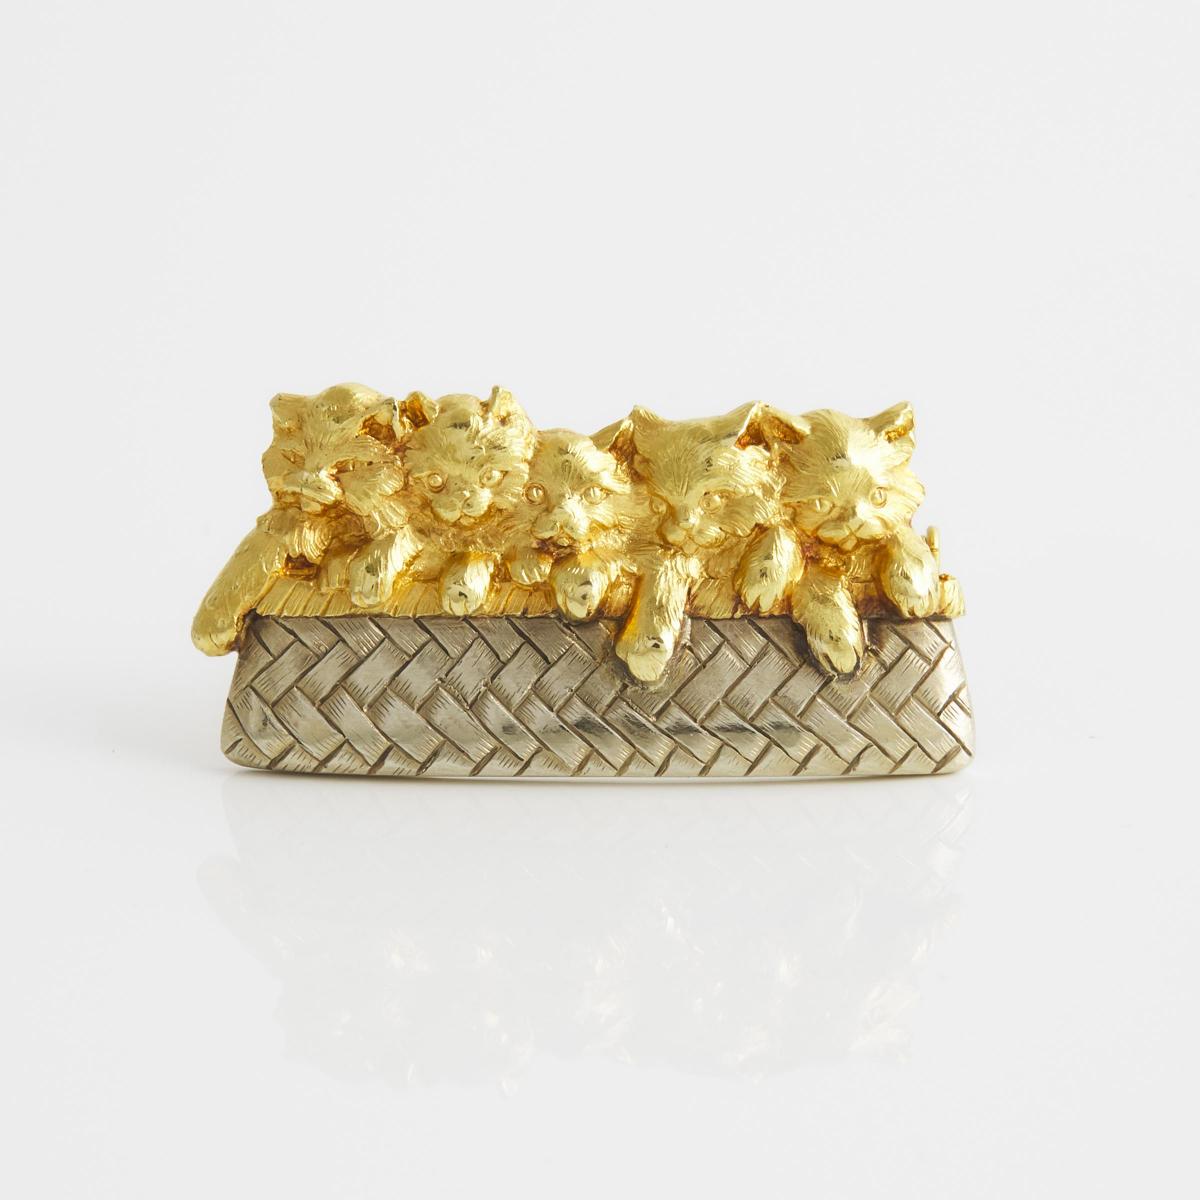 French 18k Yellow And White Gold Brooch, formed as a litter of yellow gold kittens within a white go